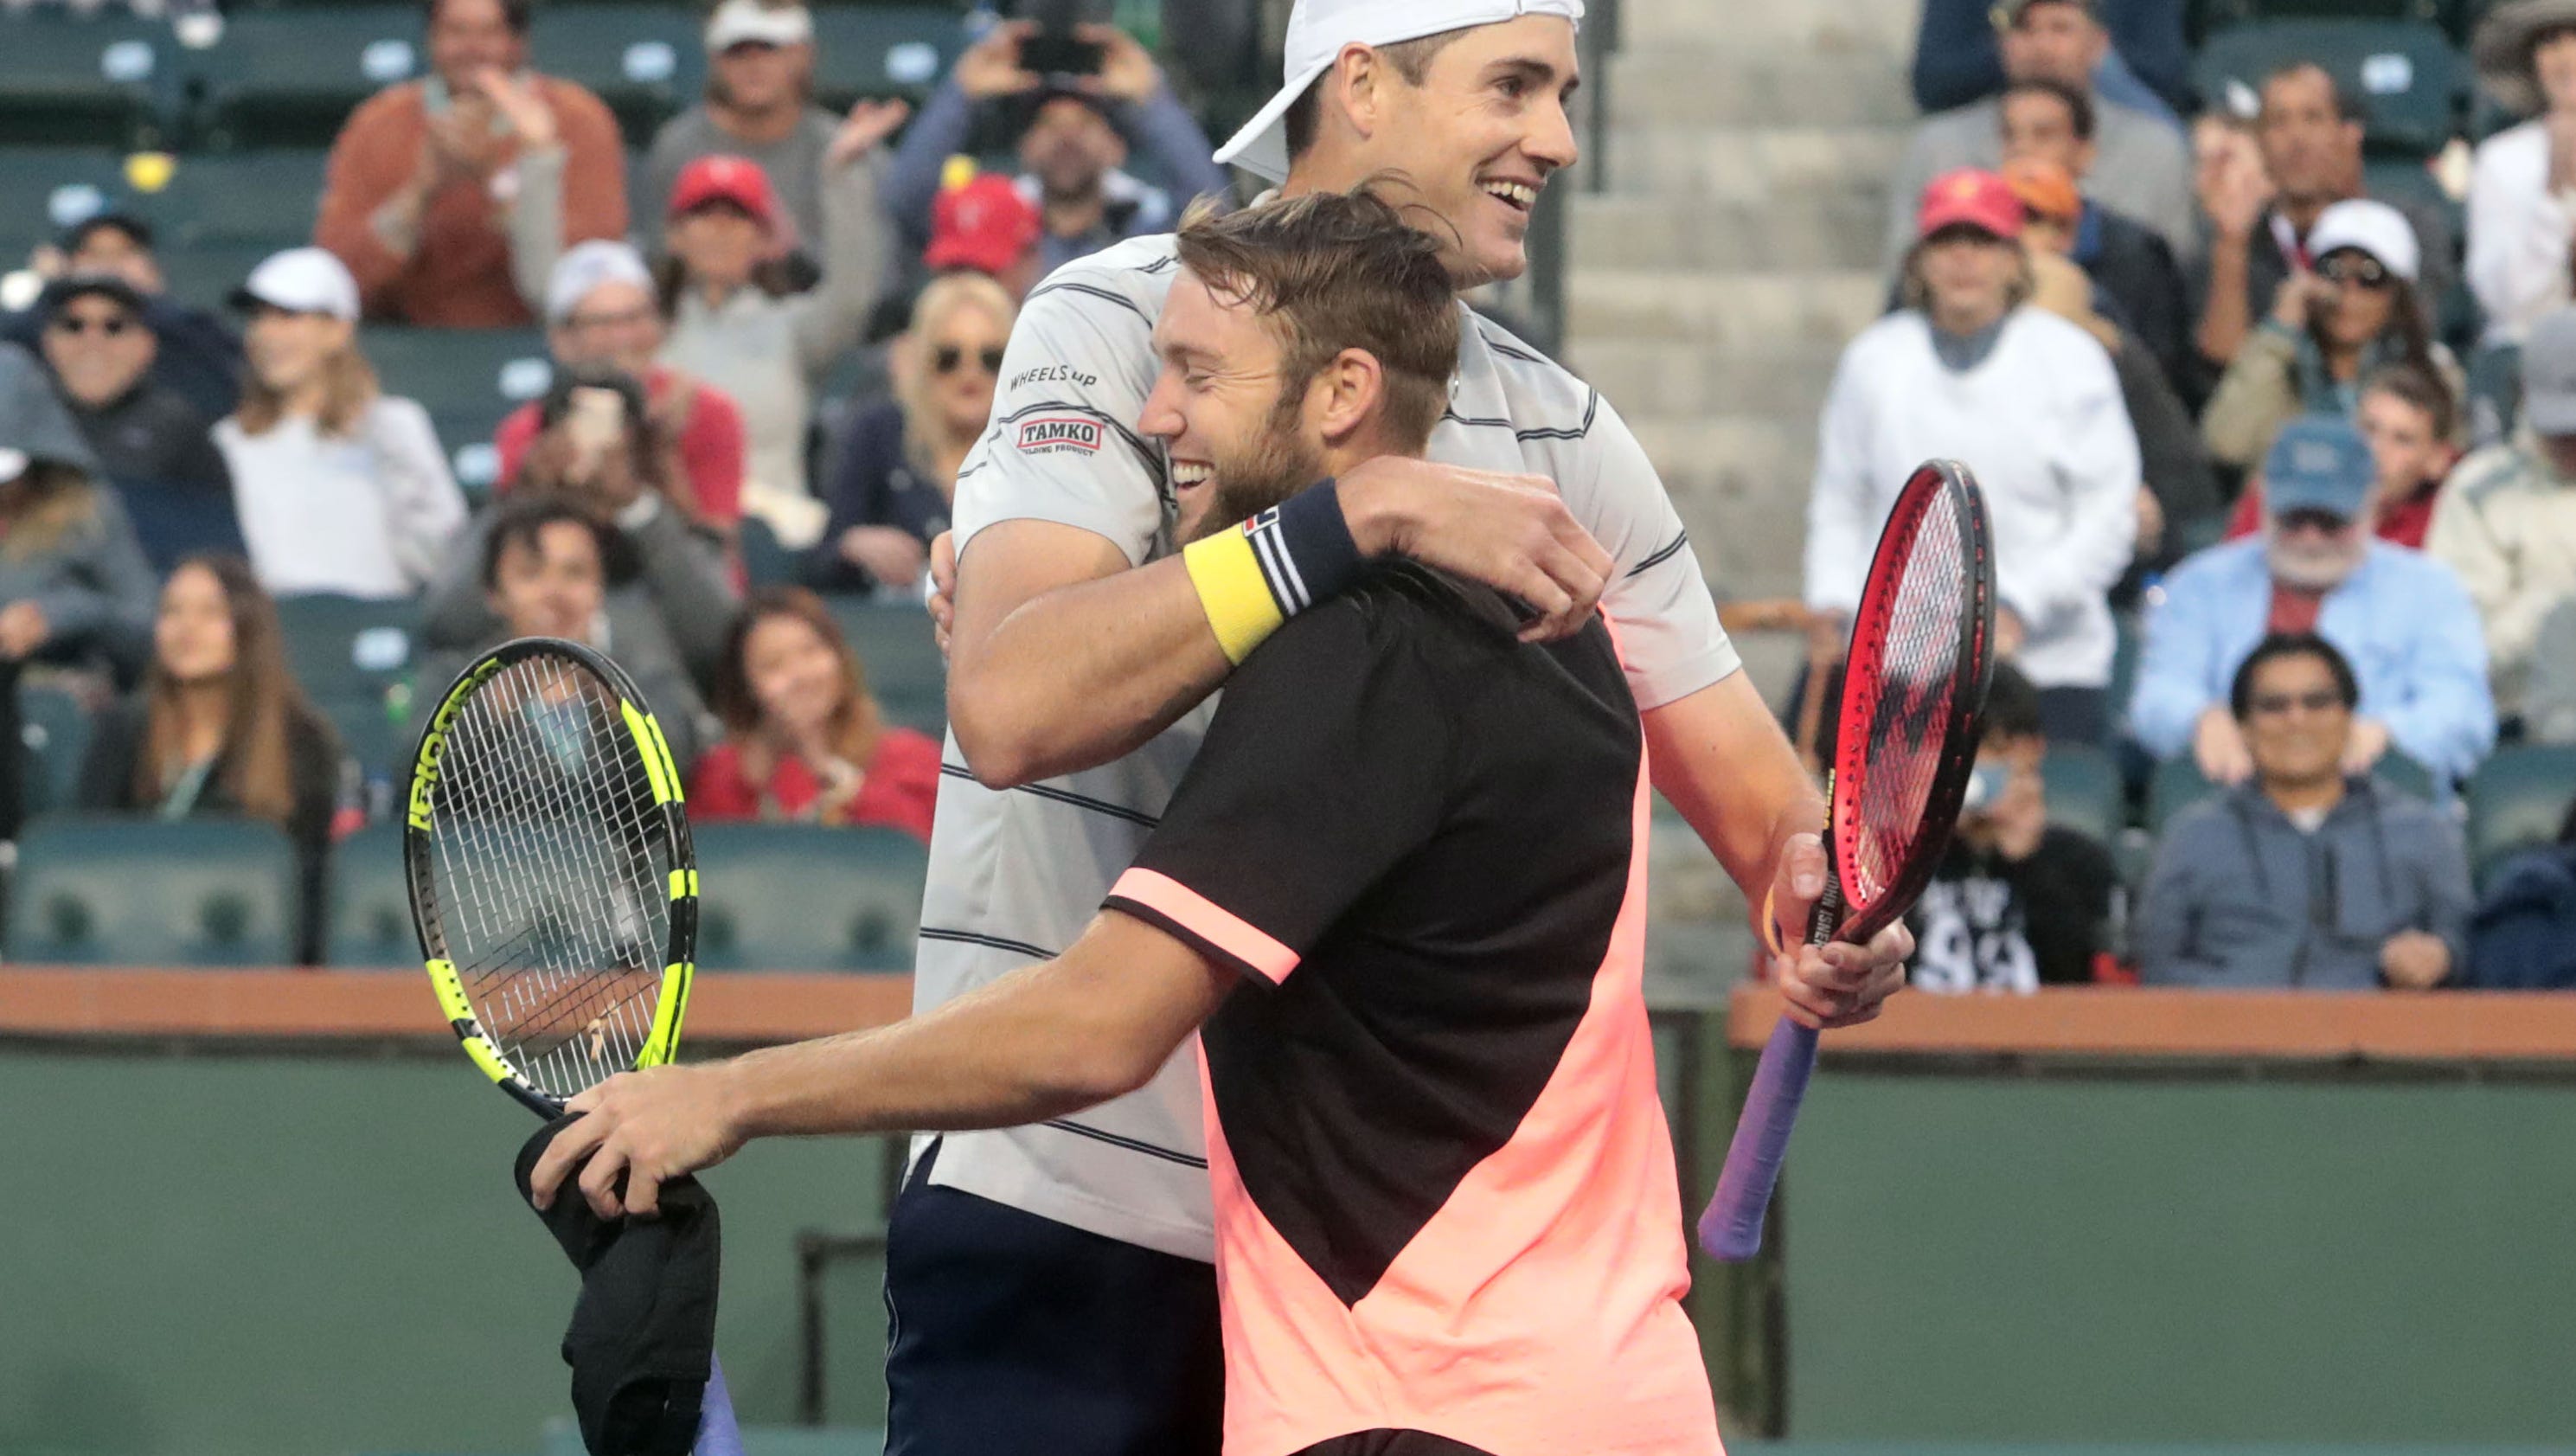 Jack Sock, John Isner are the latest Americans to win doubles title at Indian Wells